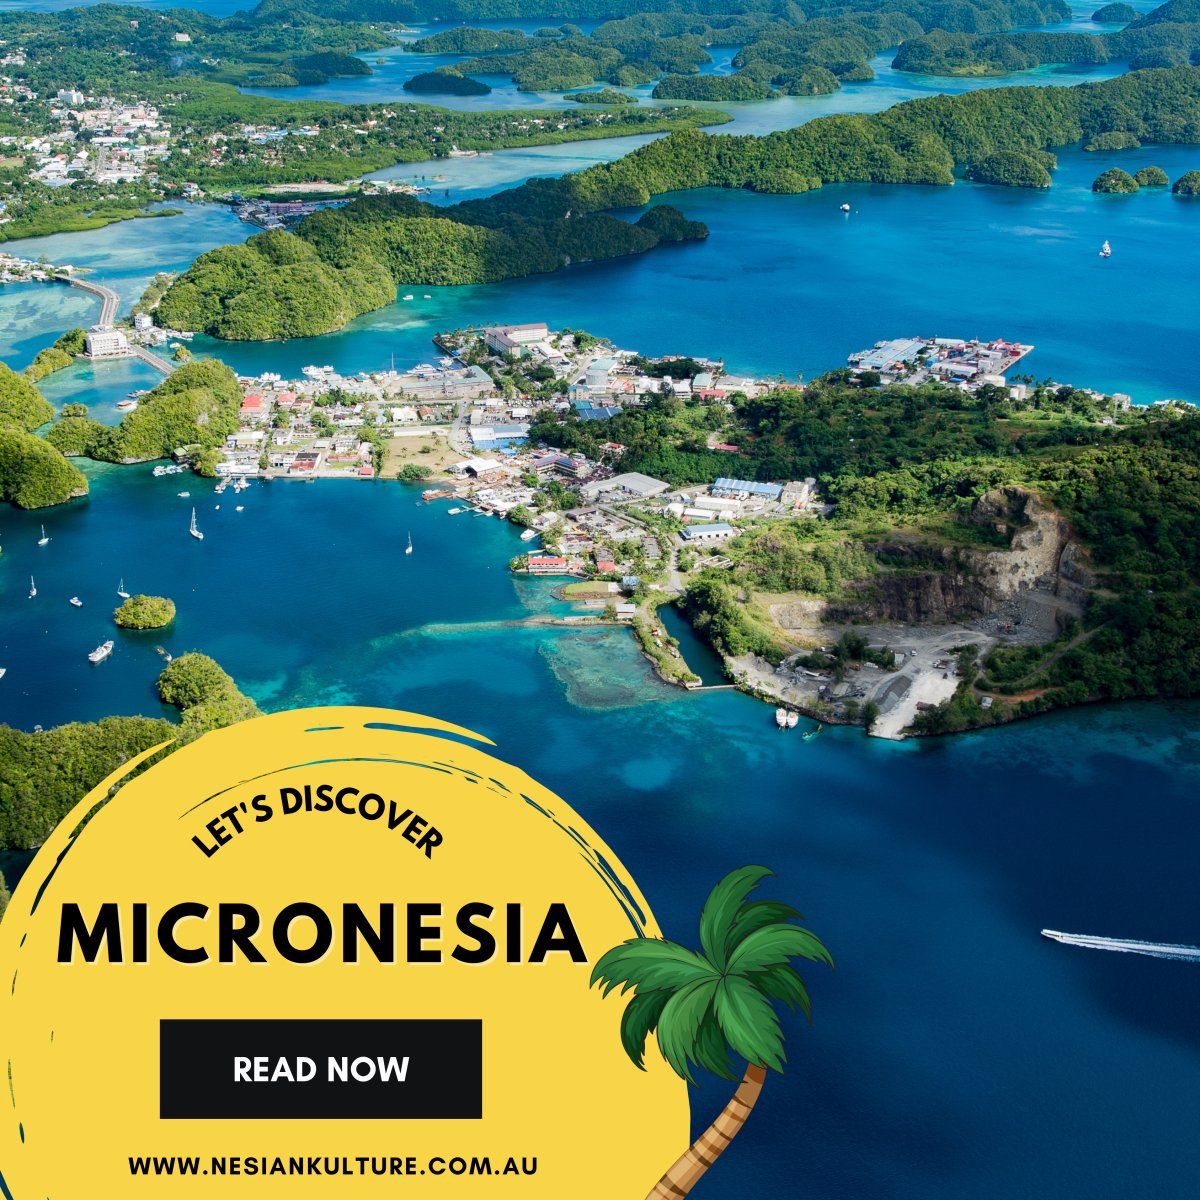 Let's Discover Micronesia - Nesian Kulture